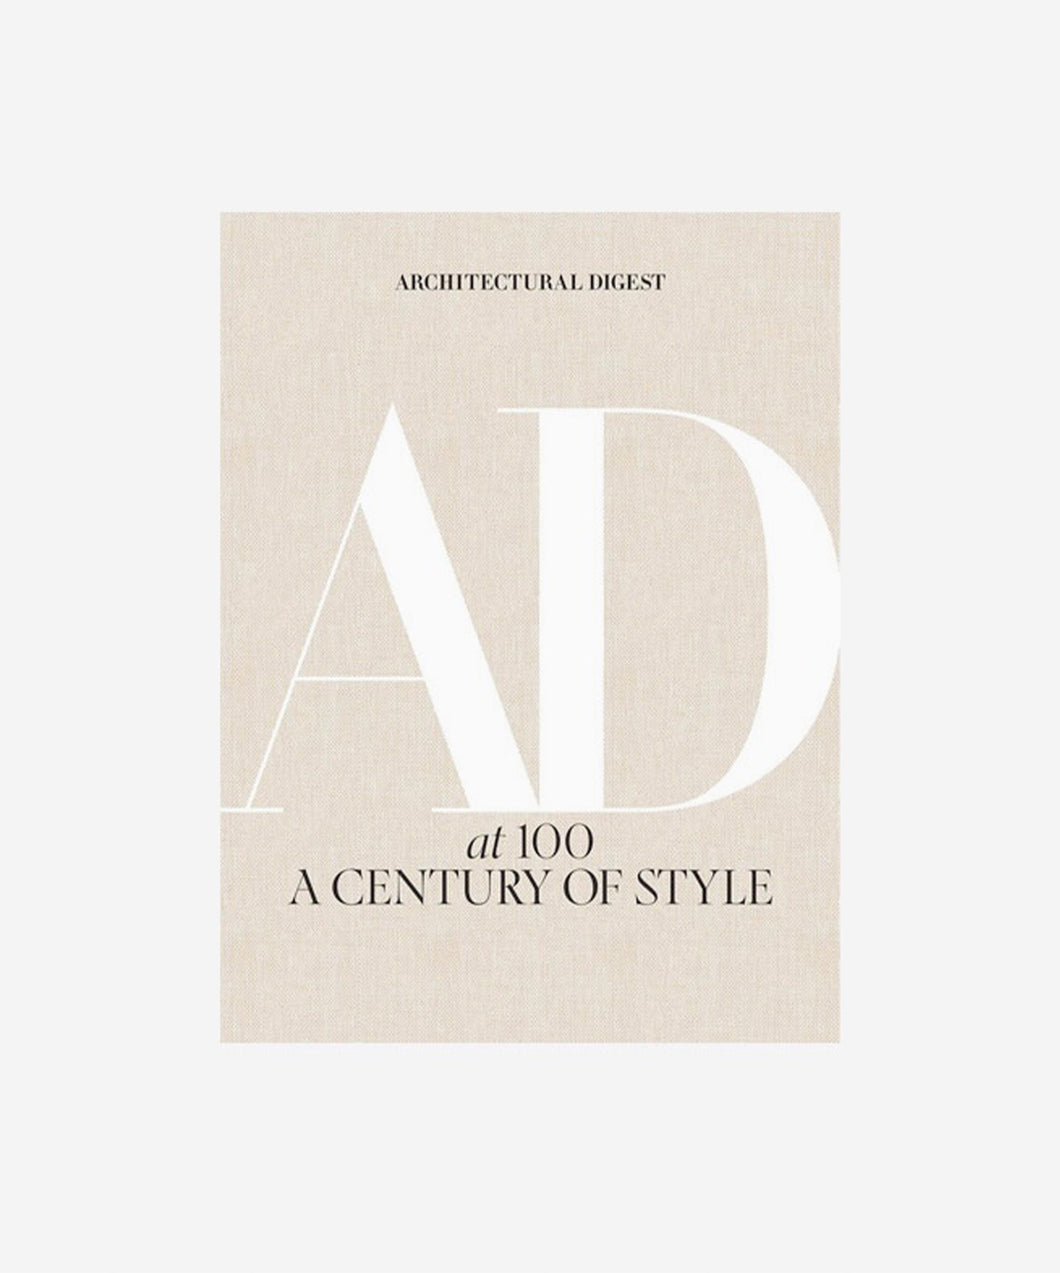 architectural digest at 100